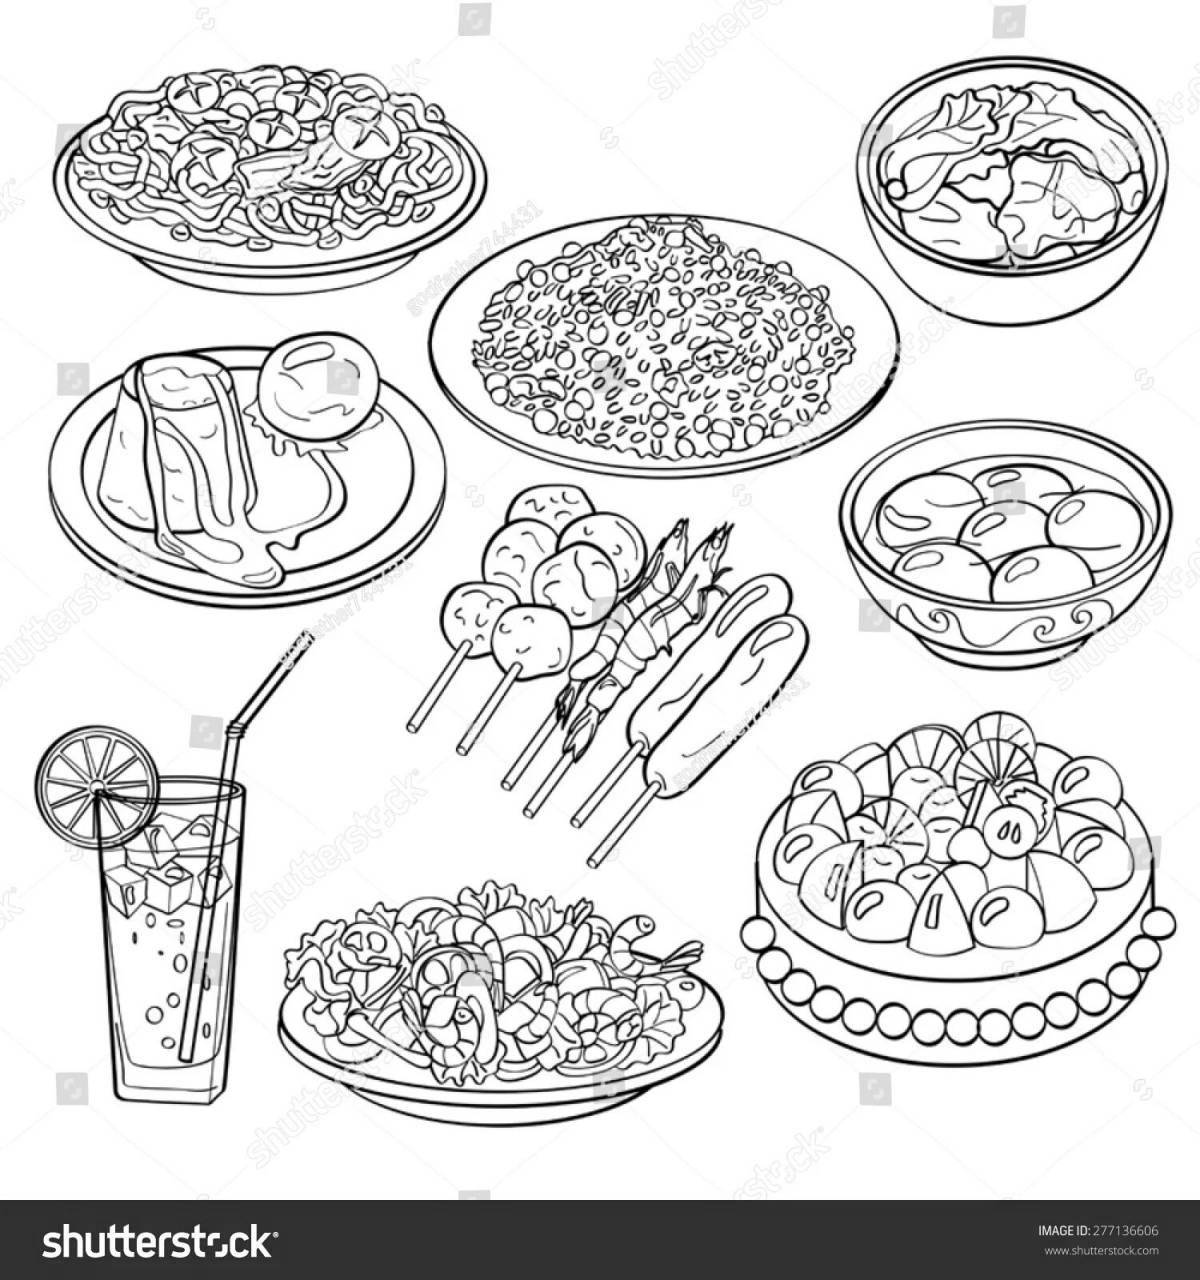 Nutritious national dishes coloring page